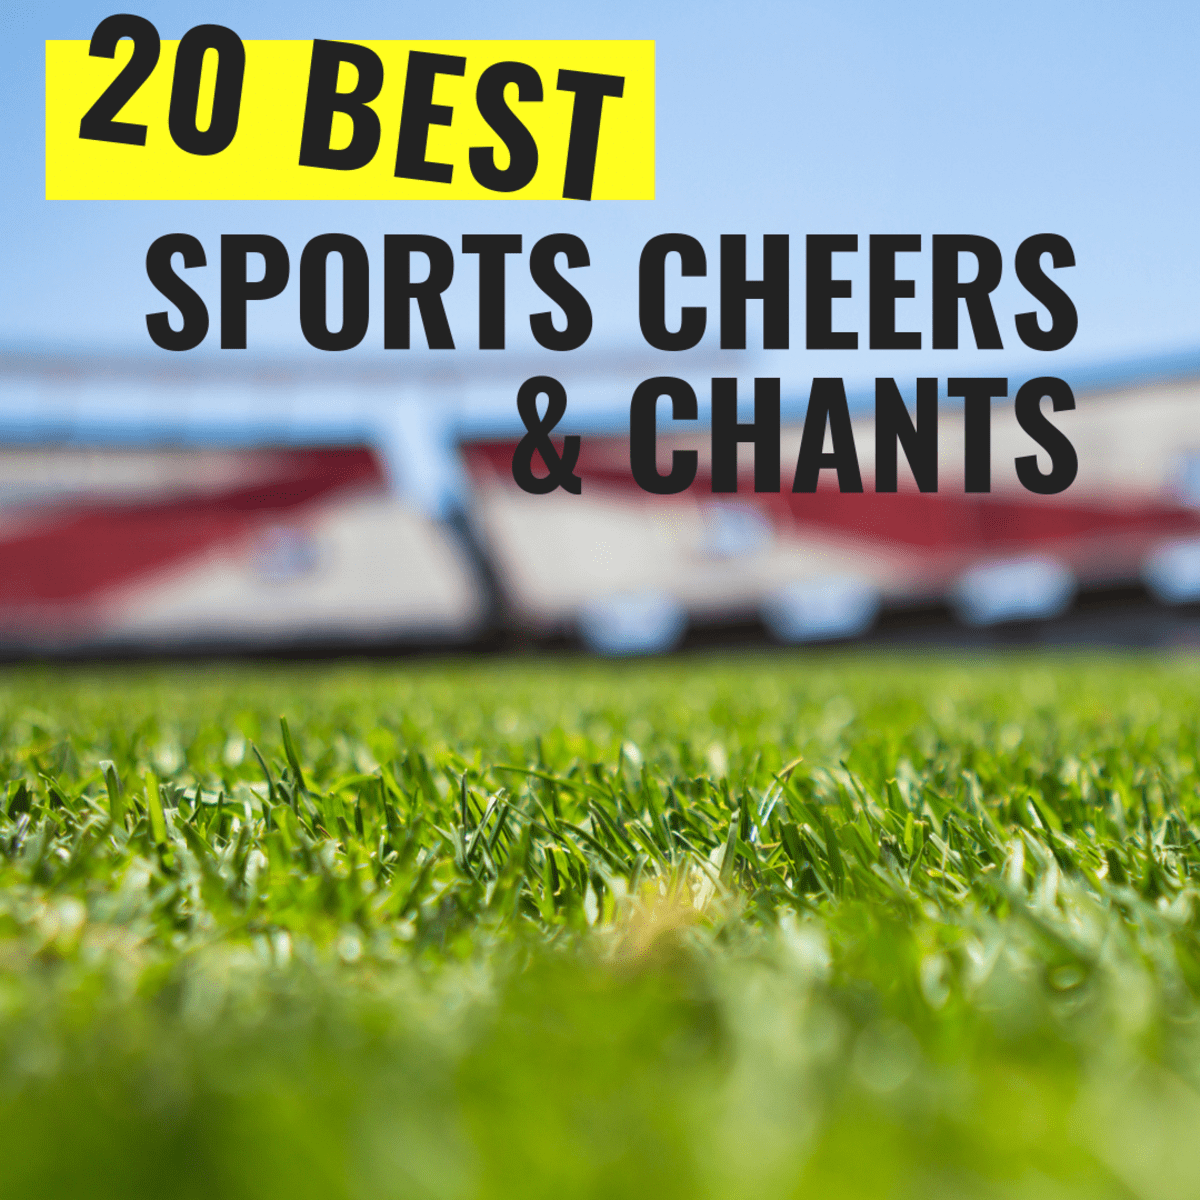 The 20 Best Team Cheers and Chants for Sports - HowTheyPlay